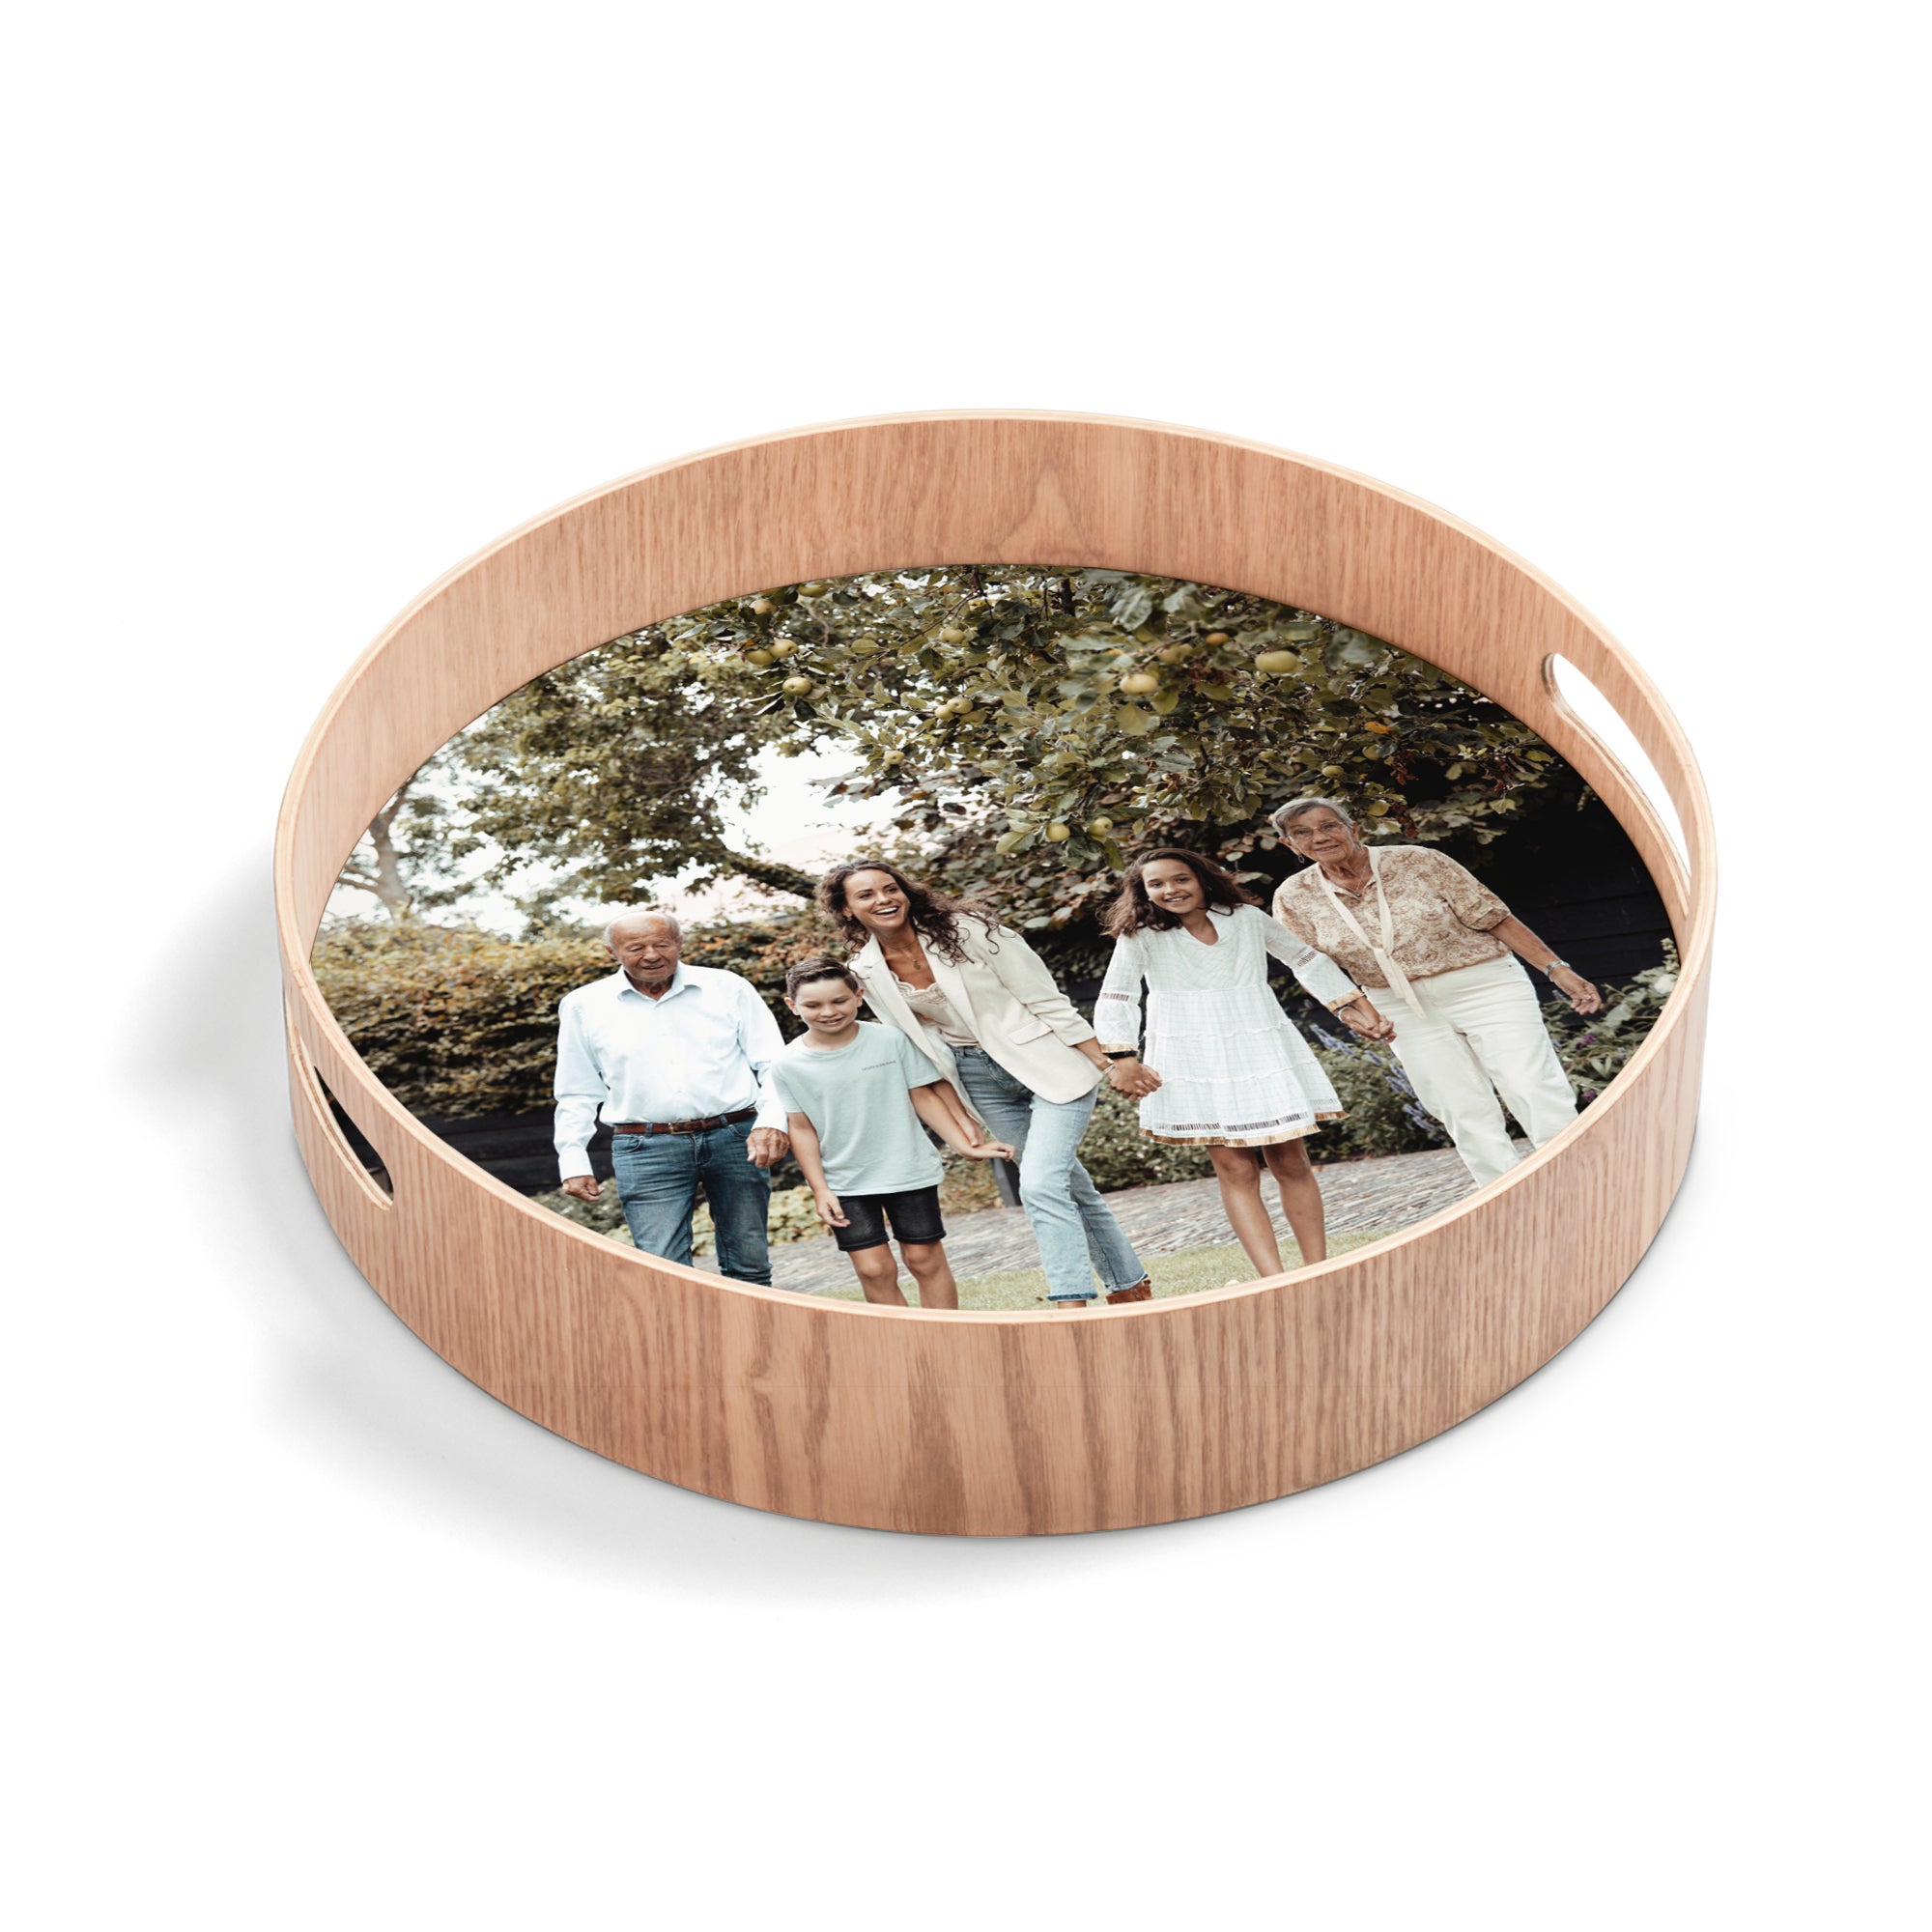 Personalised serving tray - Round - Wood - 30 cm